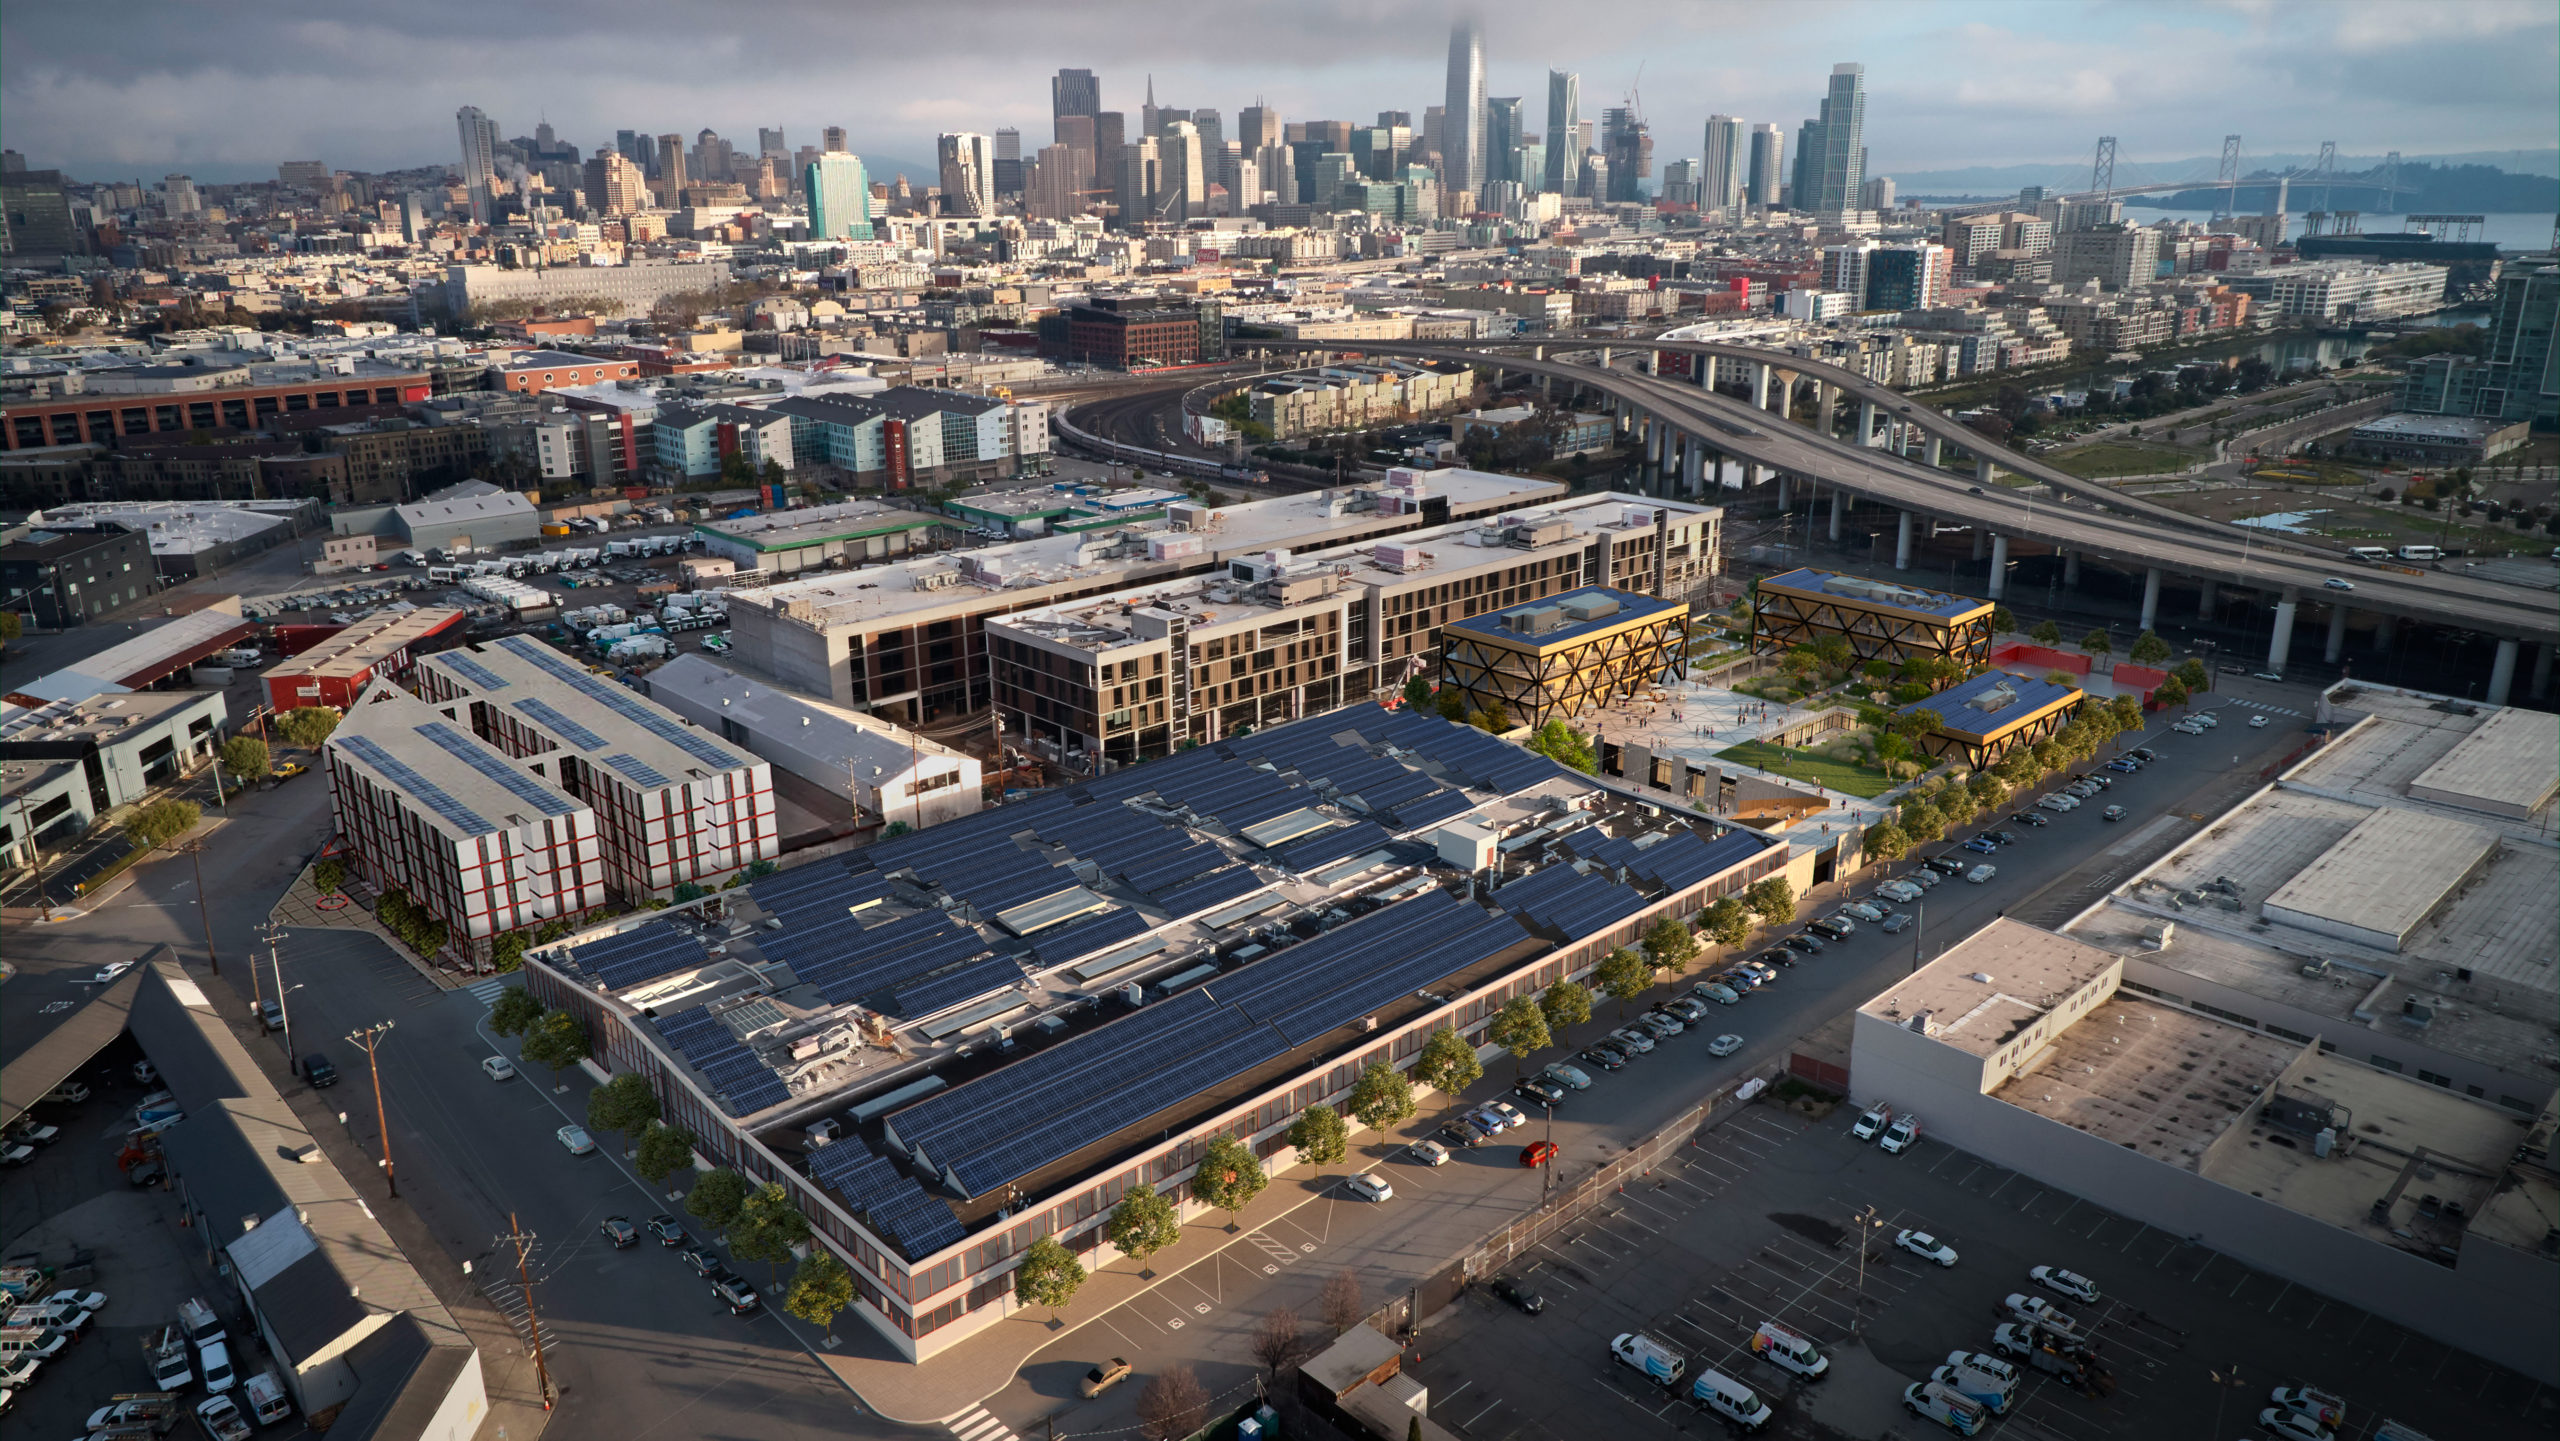 Construction Underway for California College of the Arts Expansion in San Francisco